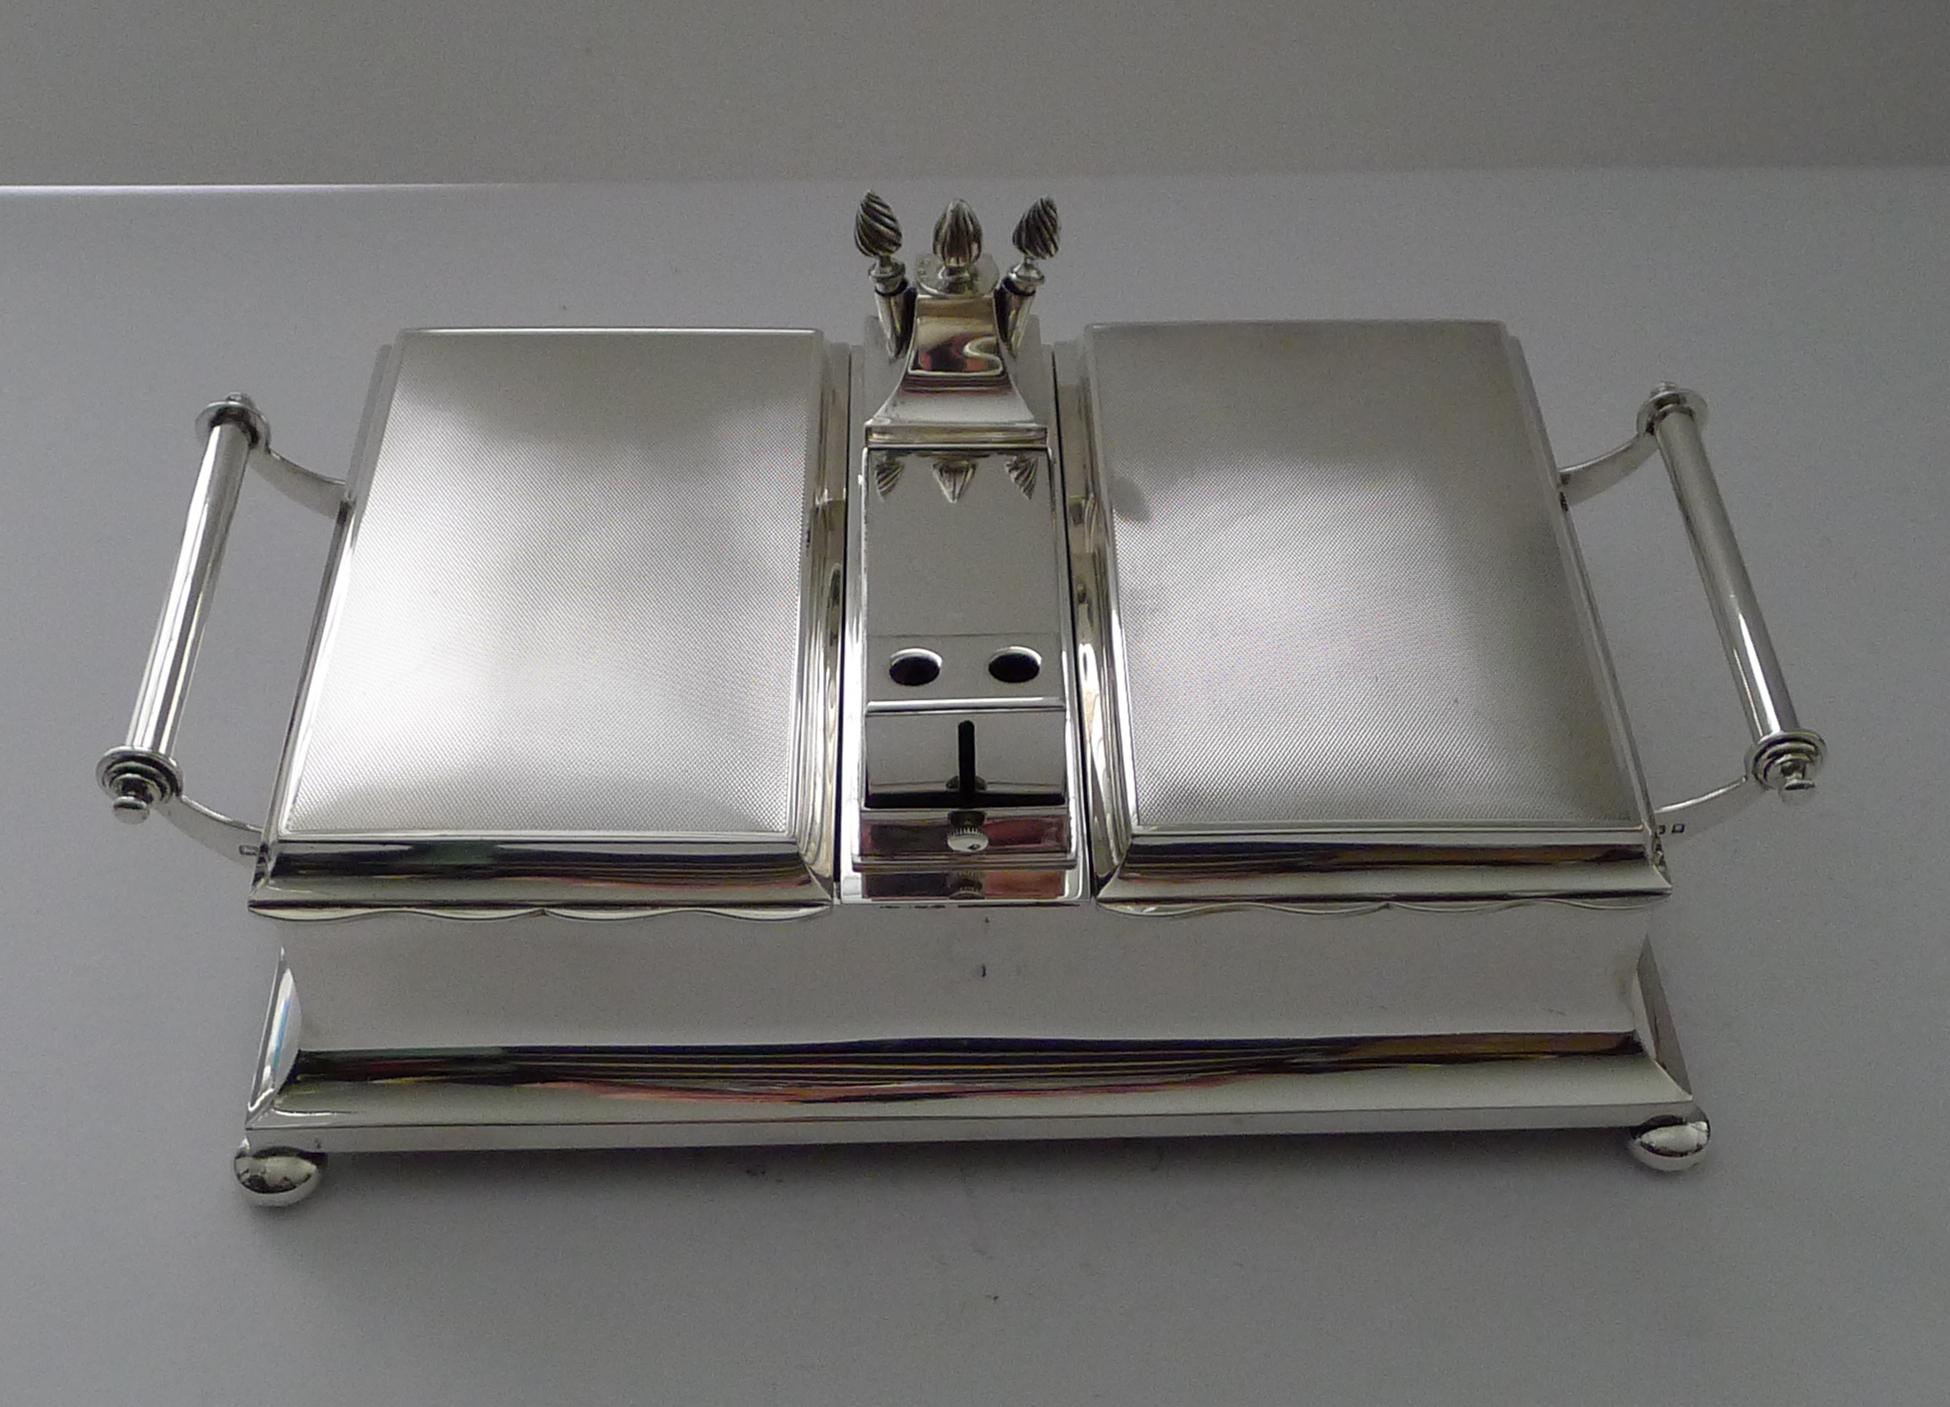 A truly exceptional Art Deco Gentleman's smoking compendium, beautiful quality by the highly sought-after silversmith, Mappin & Webb.

This impressive piece stands on four original bun feet and incorporates two hinged lidded cedar-lined cigar